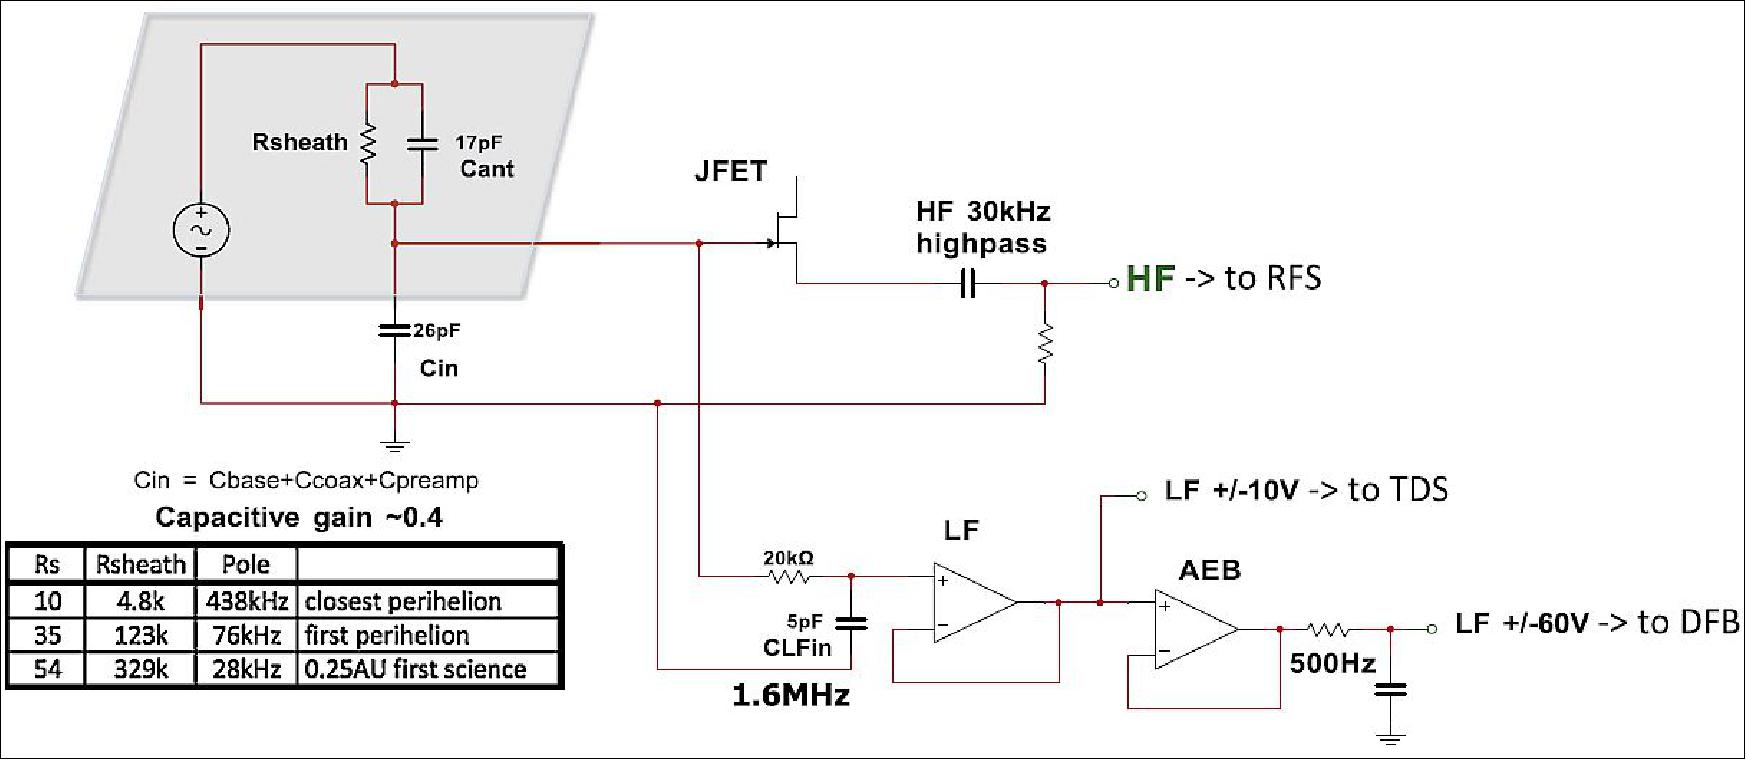 Figure 116: A simplified schematic of the V1–V4 electric preamplifier circuit. A signal from the antenna whip is fed into 3 separate channels that feed the DFB, TDS, and RFS receivers. The LF side using a floating voltage system to accommodate the large expected plasma voltage variations. The grey box in the upper left represents the plasma voltage signal and sheath impedance, and some estimated values of the sheath resistance are shown in the table within the figure (image credit: FIELDS collaboration)